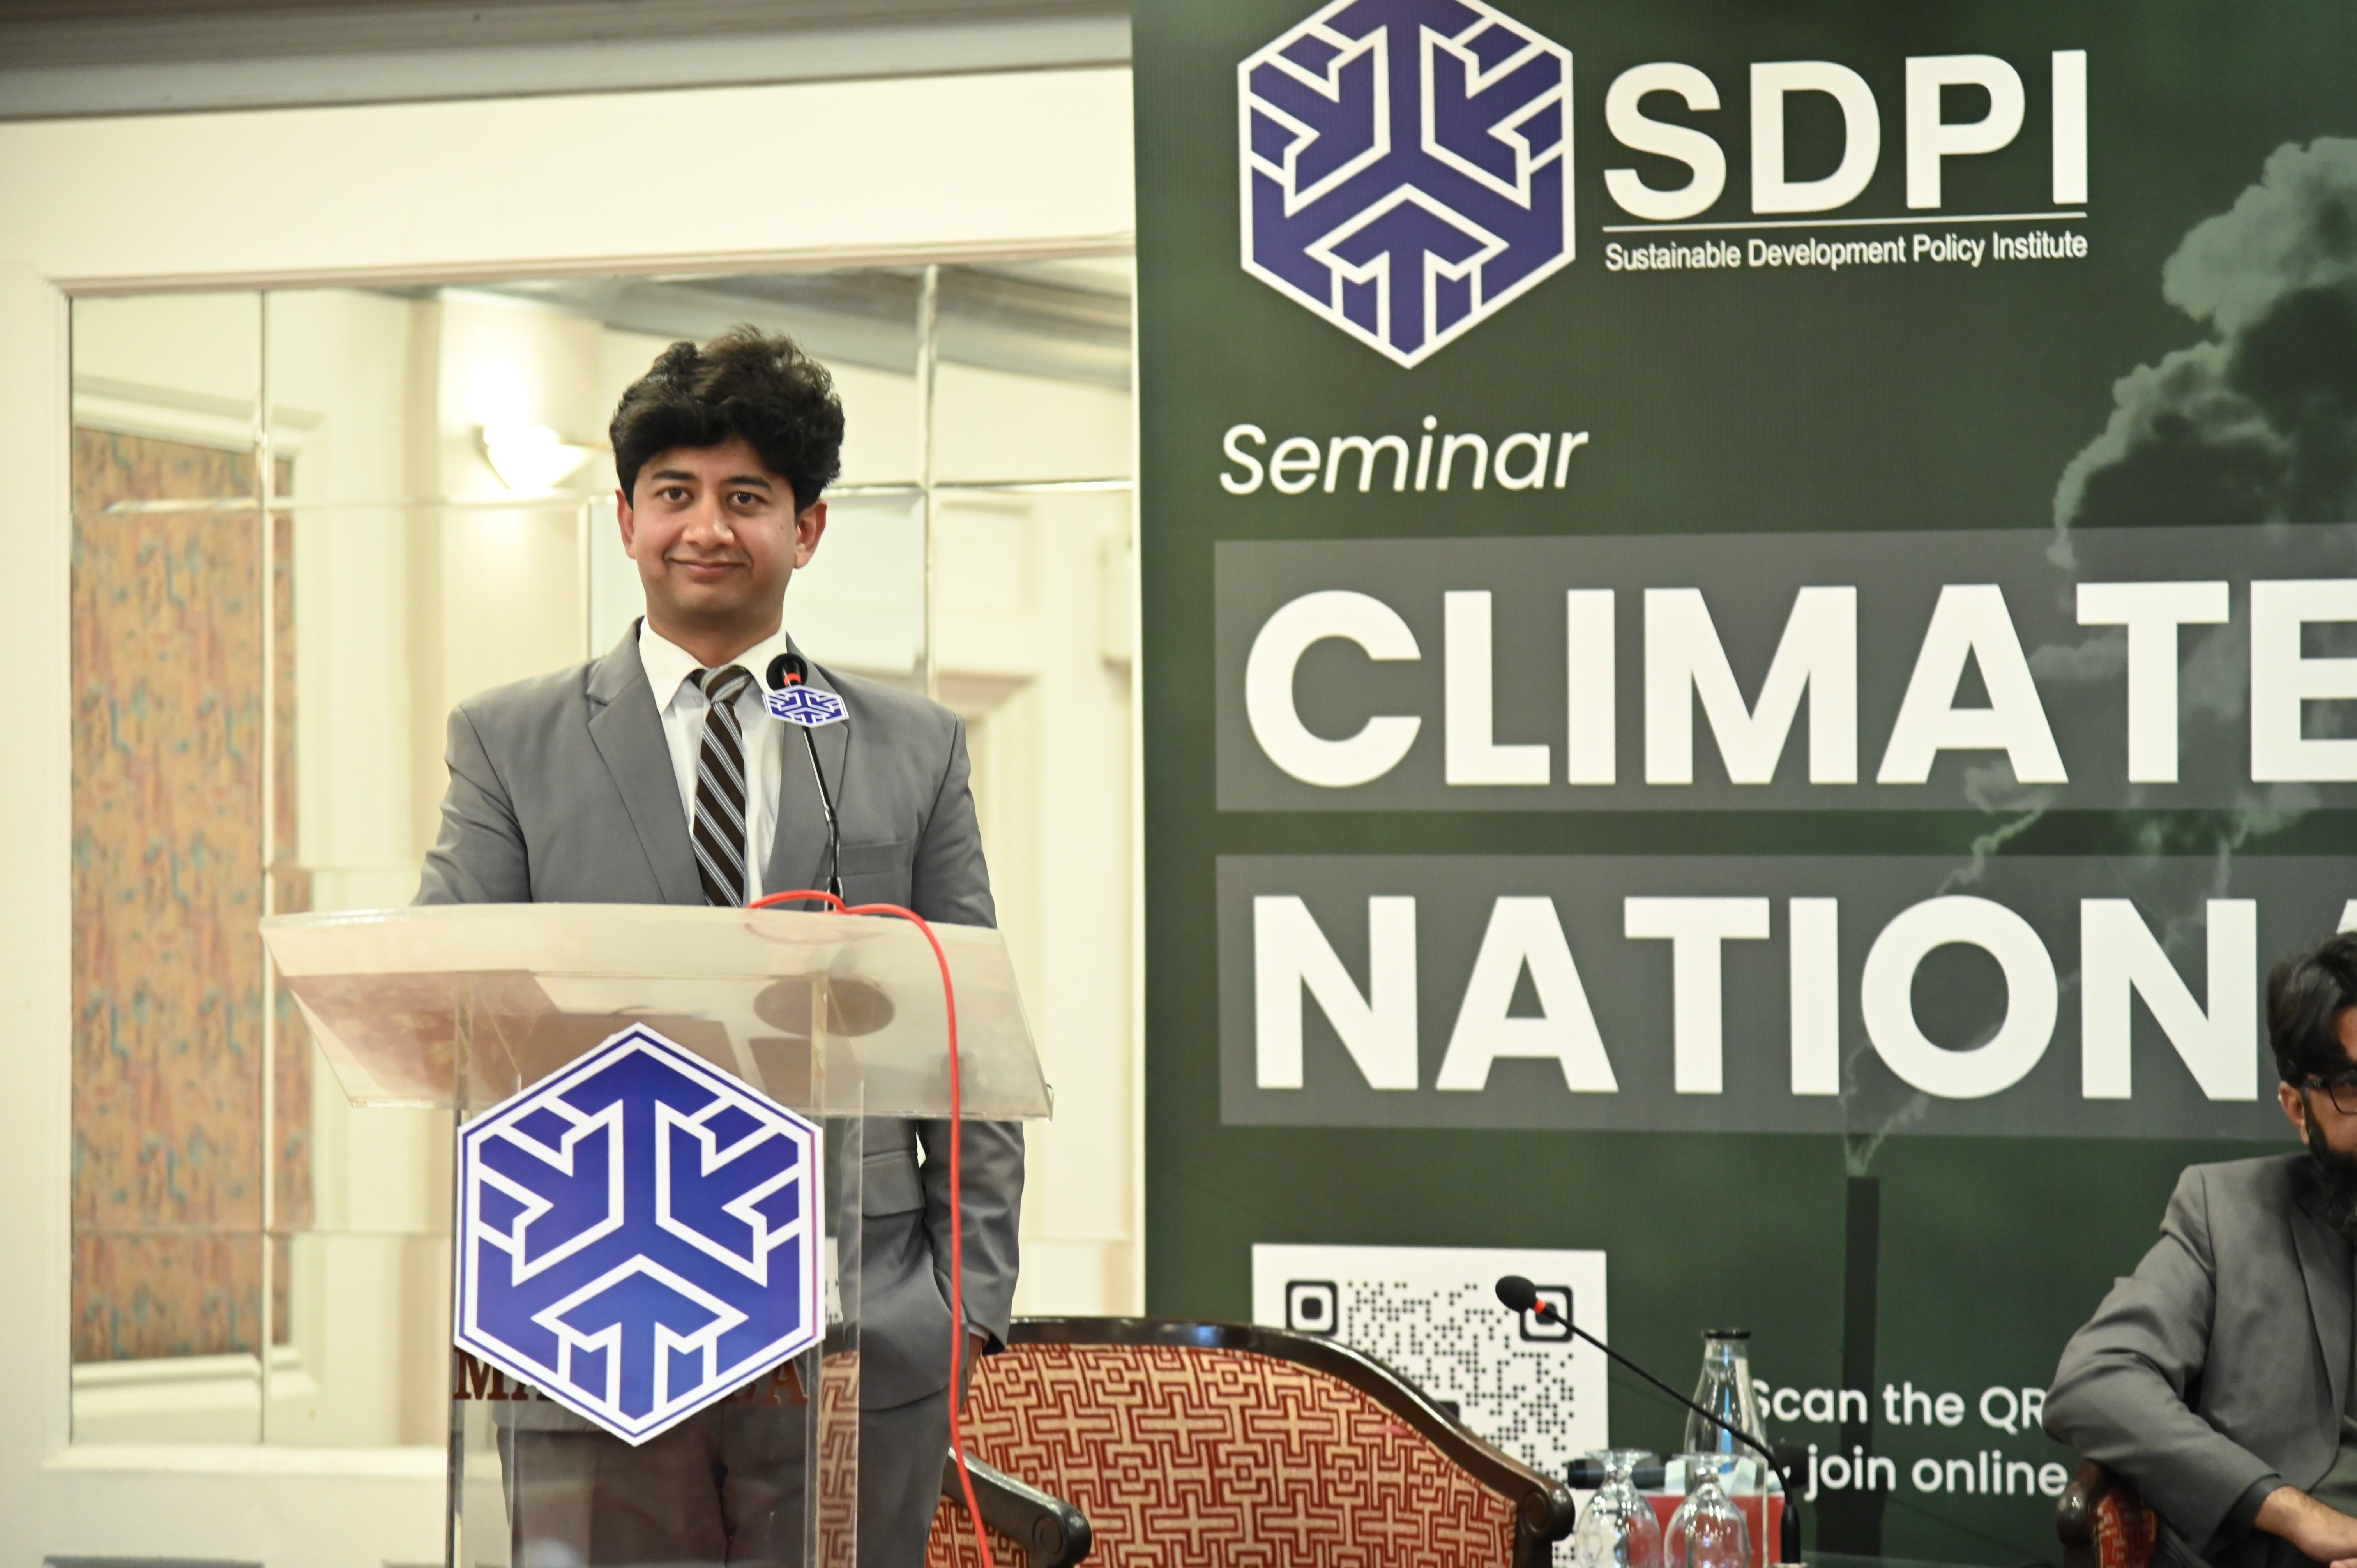 The Climate Change Seminar organized by SDPI